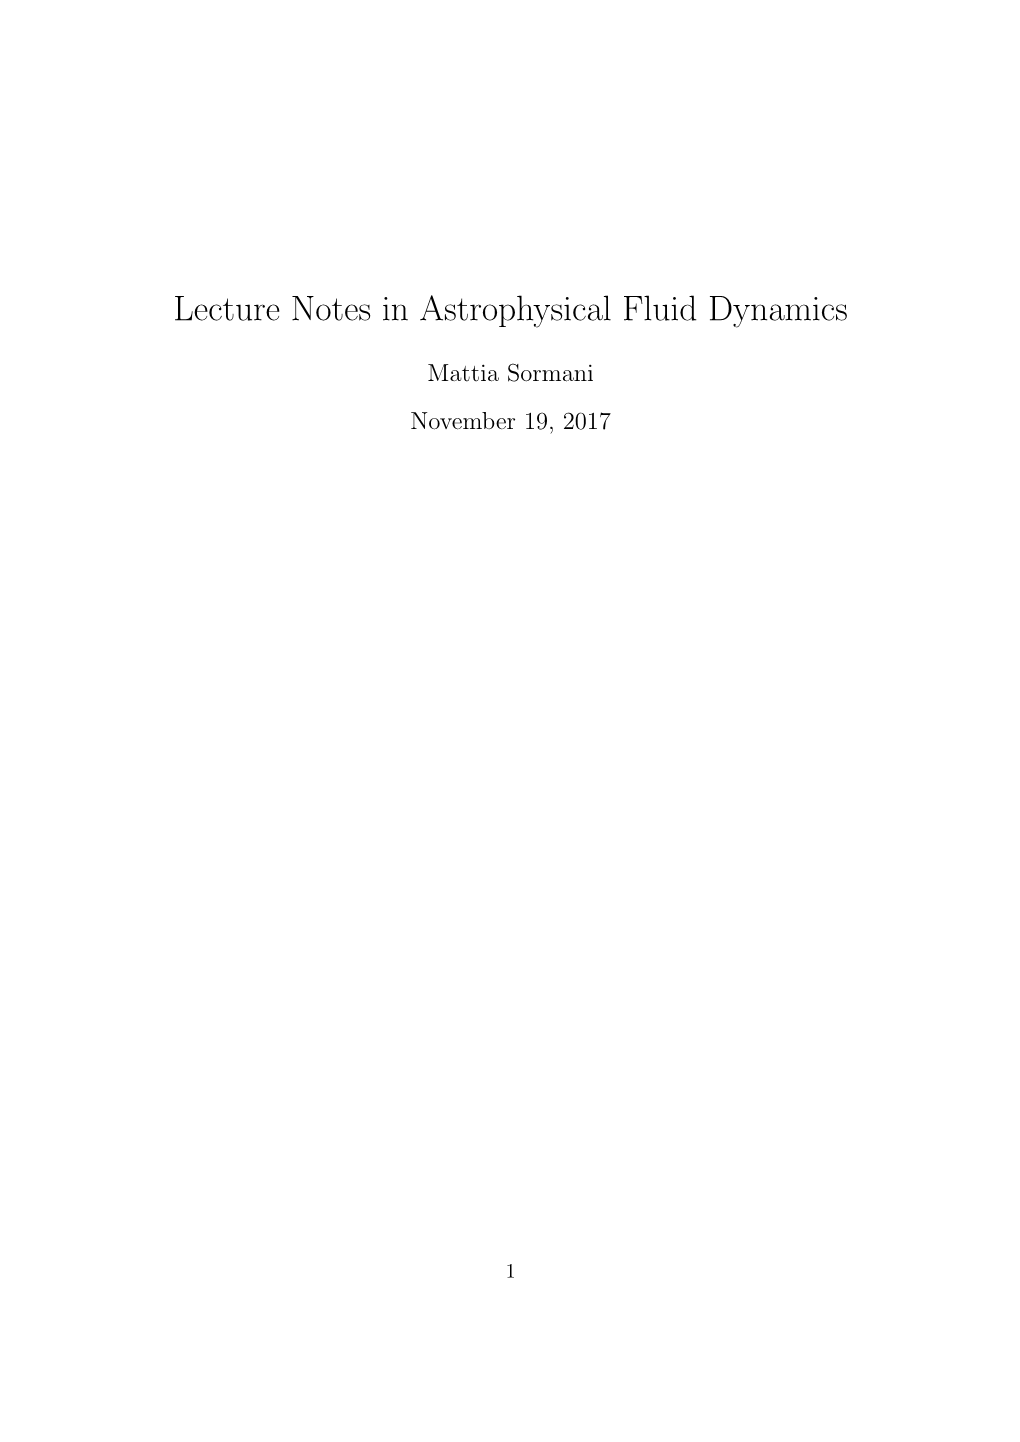 Lecture Notes in Astrophysical Fluid Dynamics